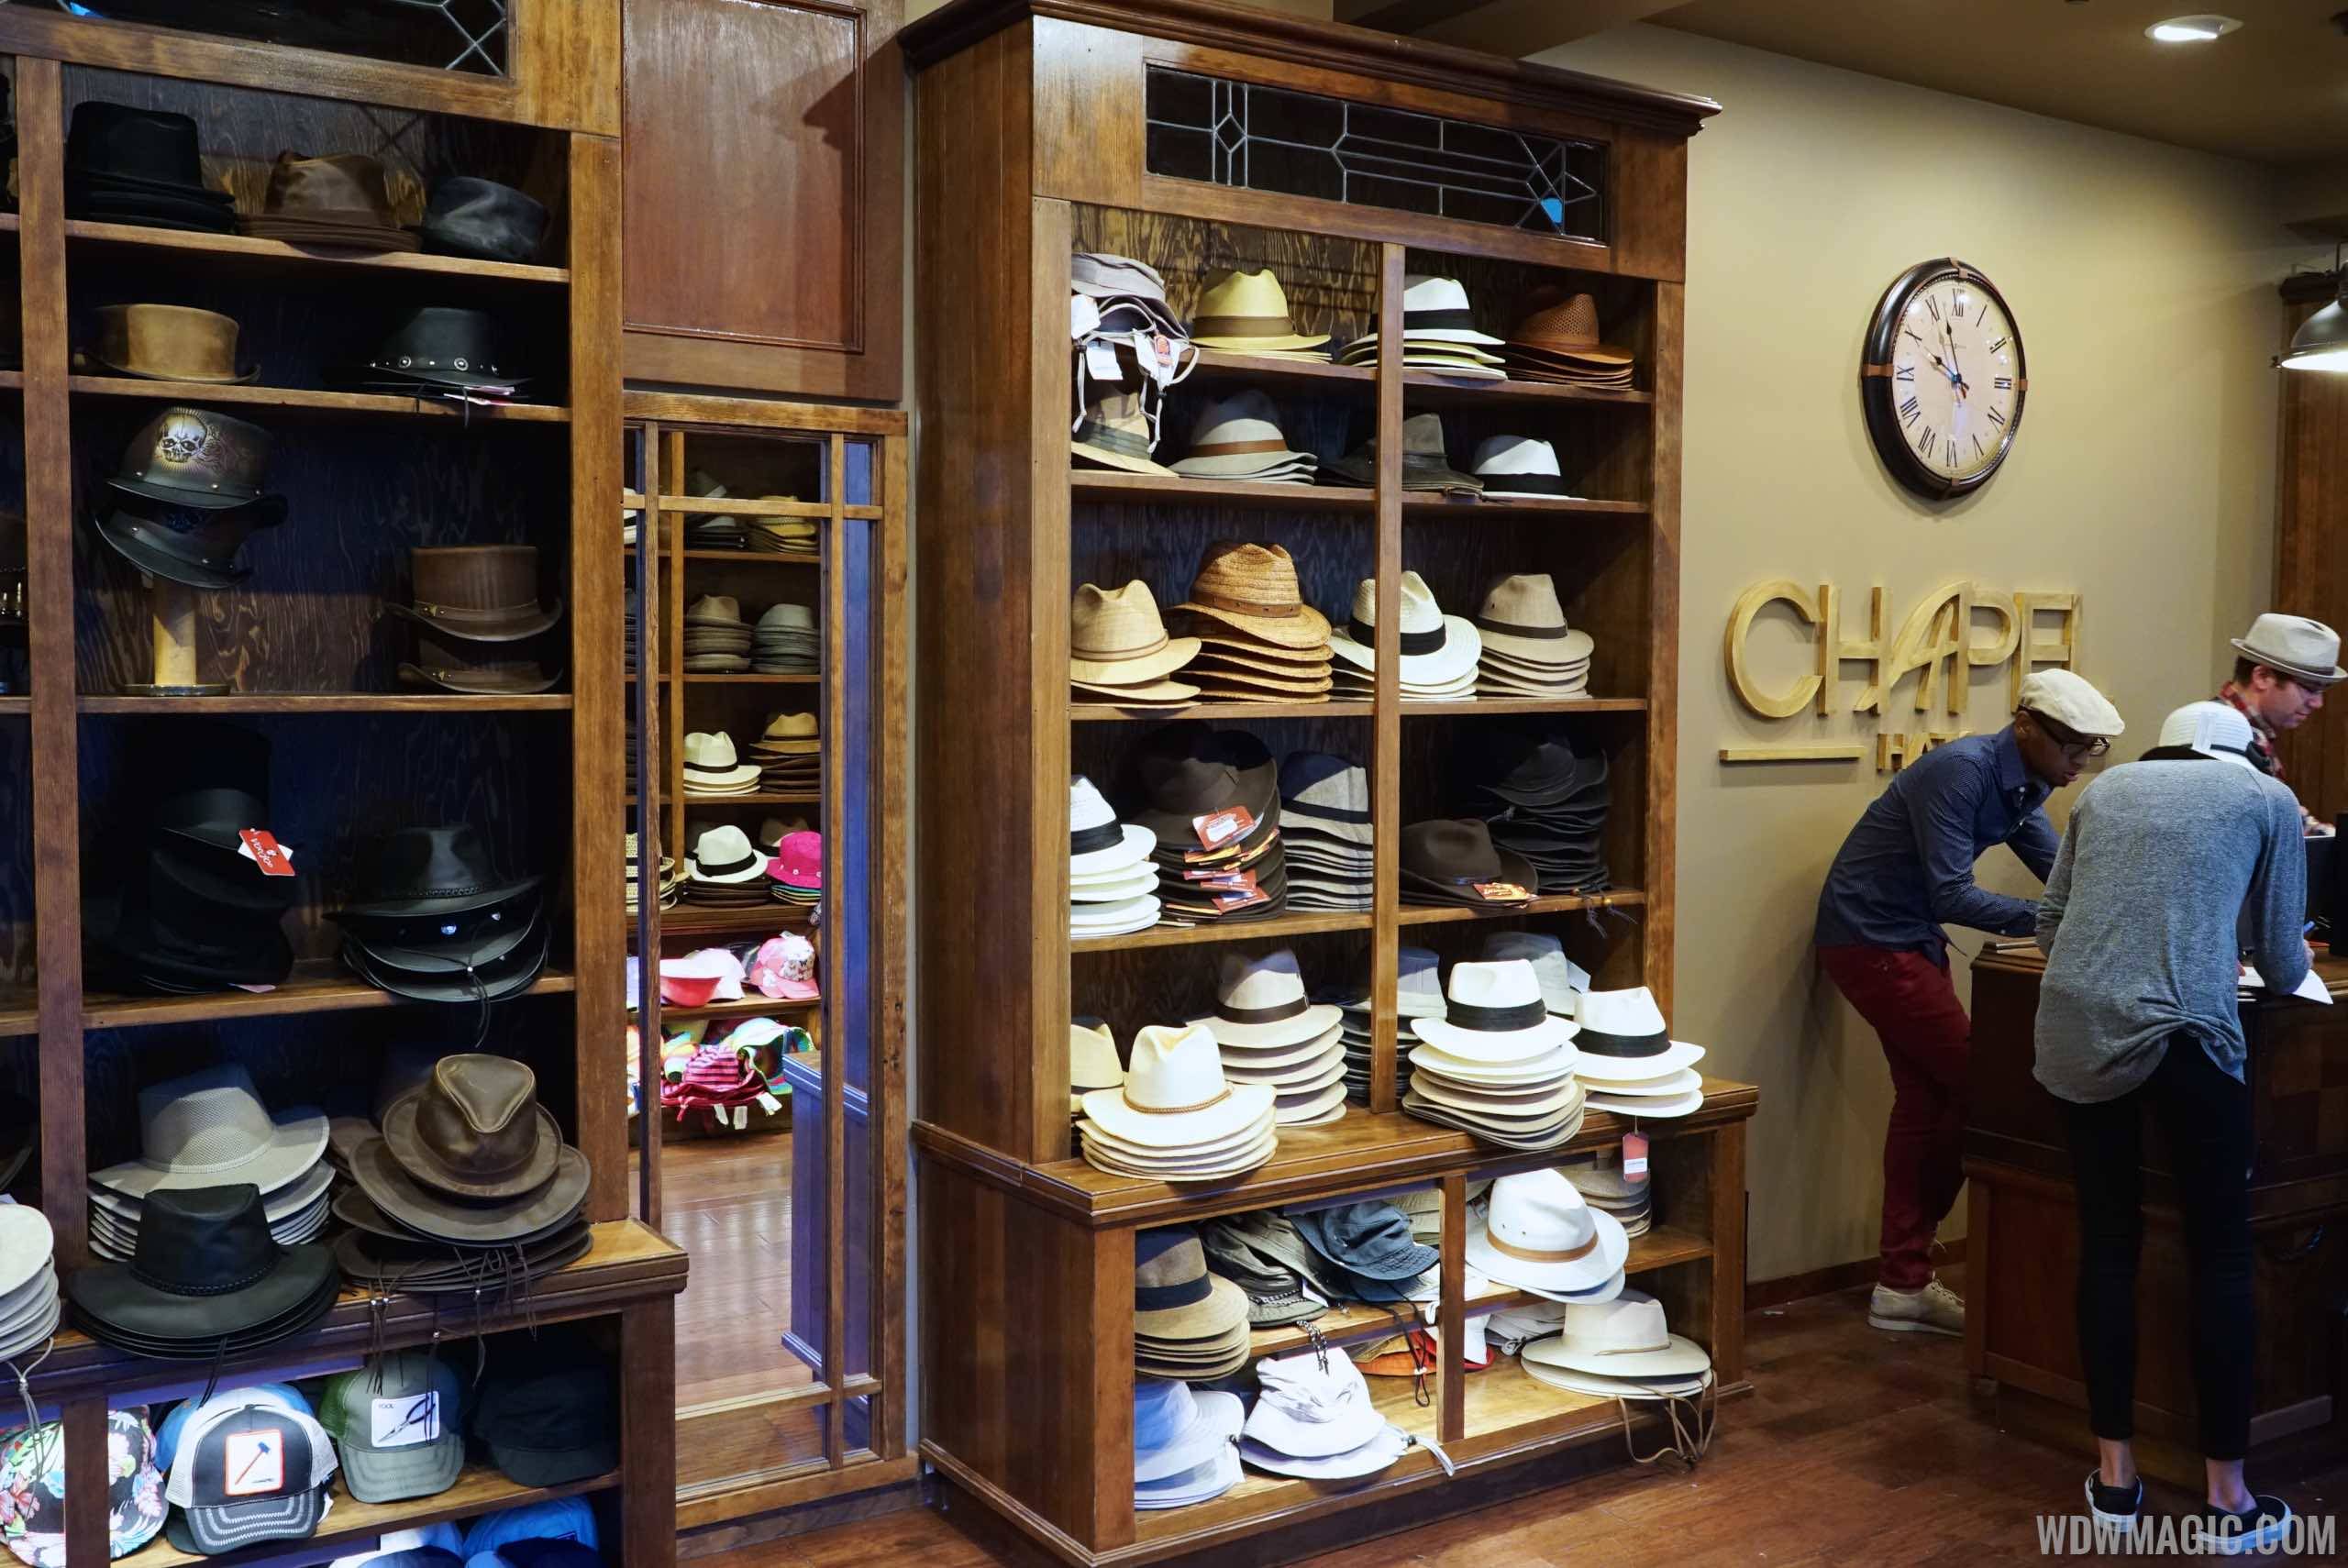 Chapel Hats - Store overview